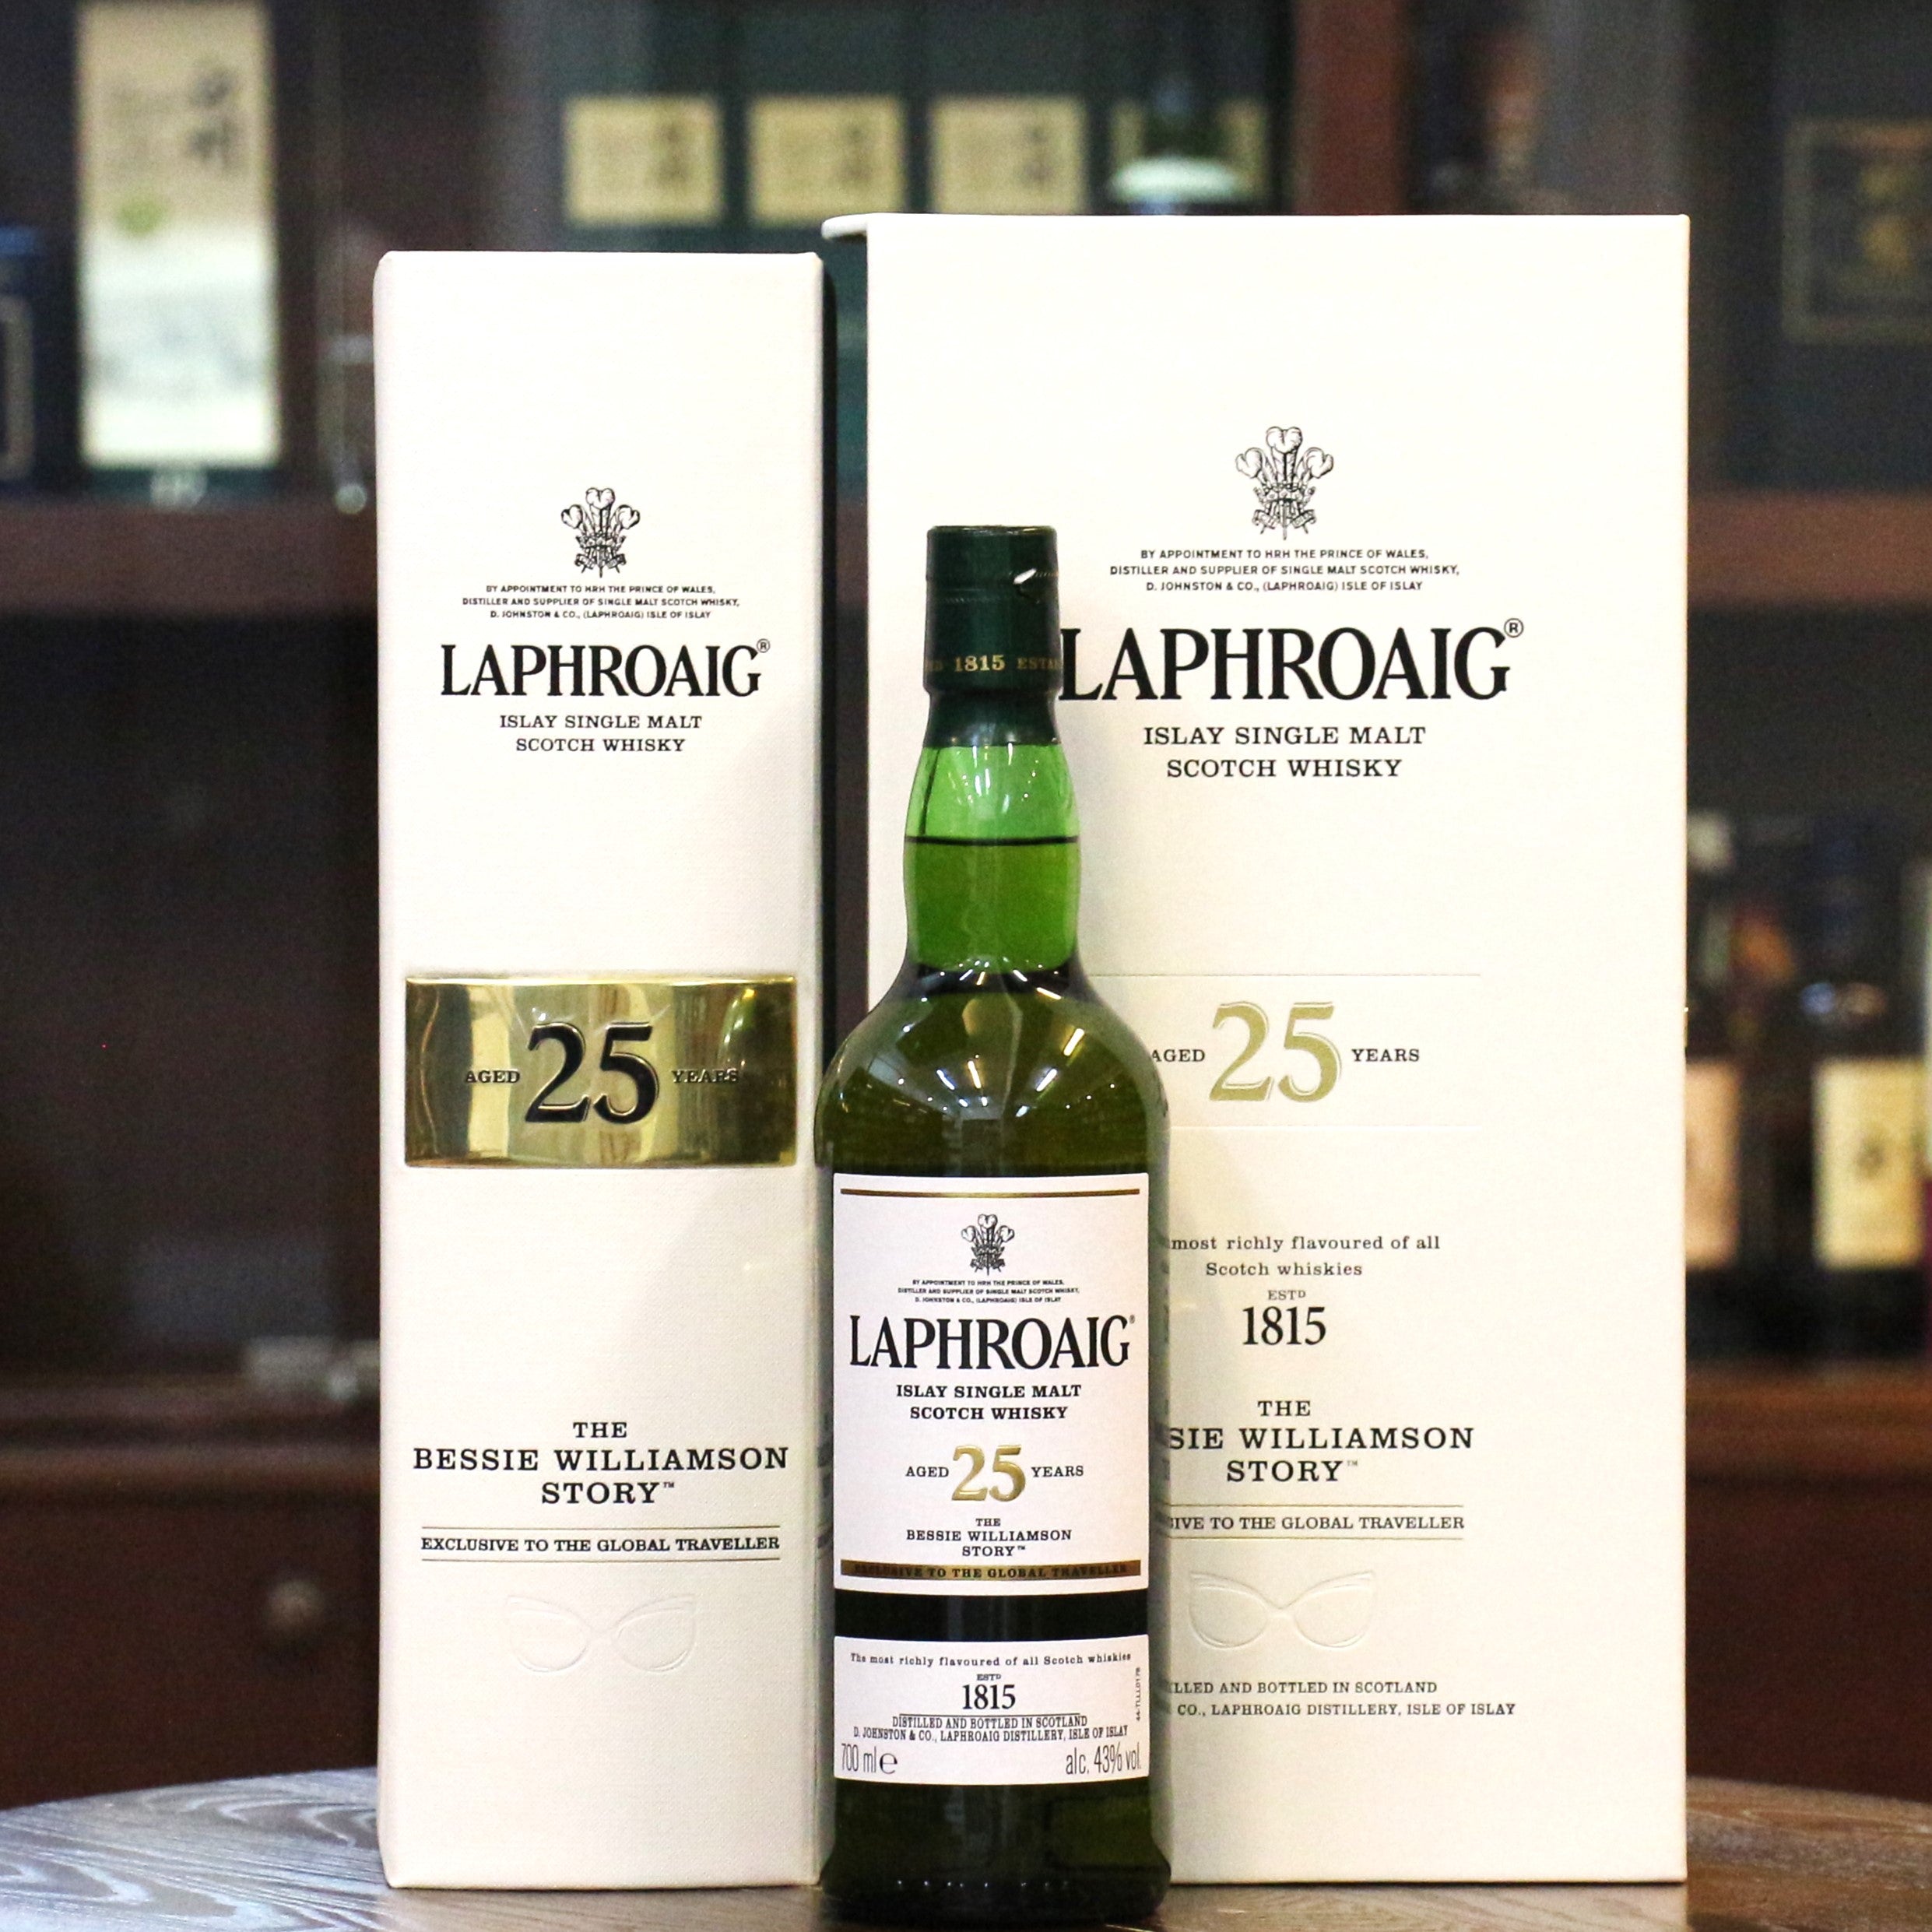 This is a special release for Bessie Williamson, who was the first woman in the 20th century to own and run Laphroaig distillery